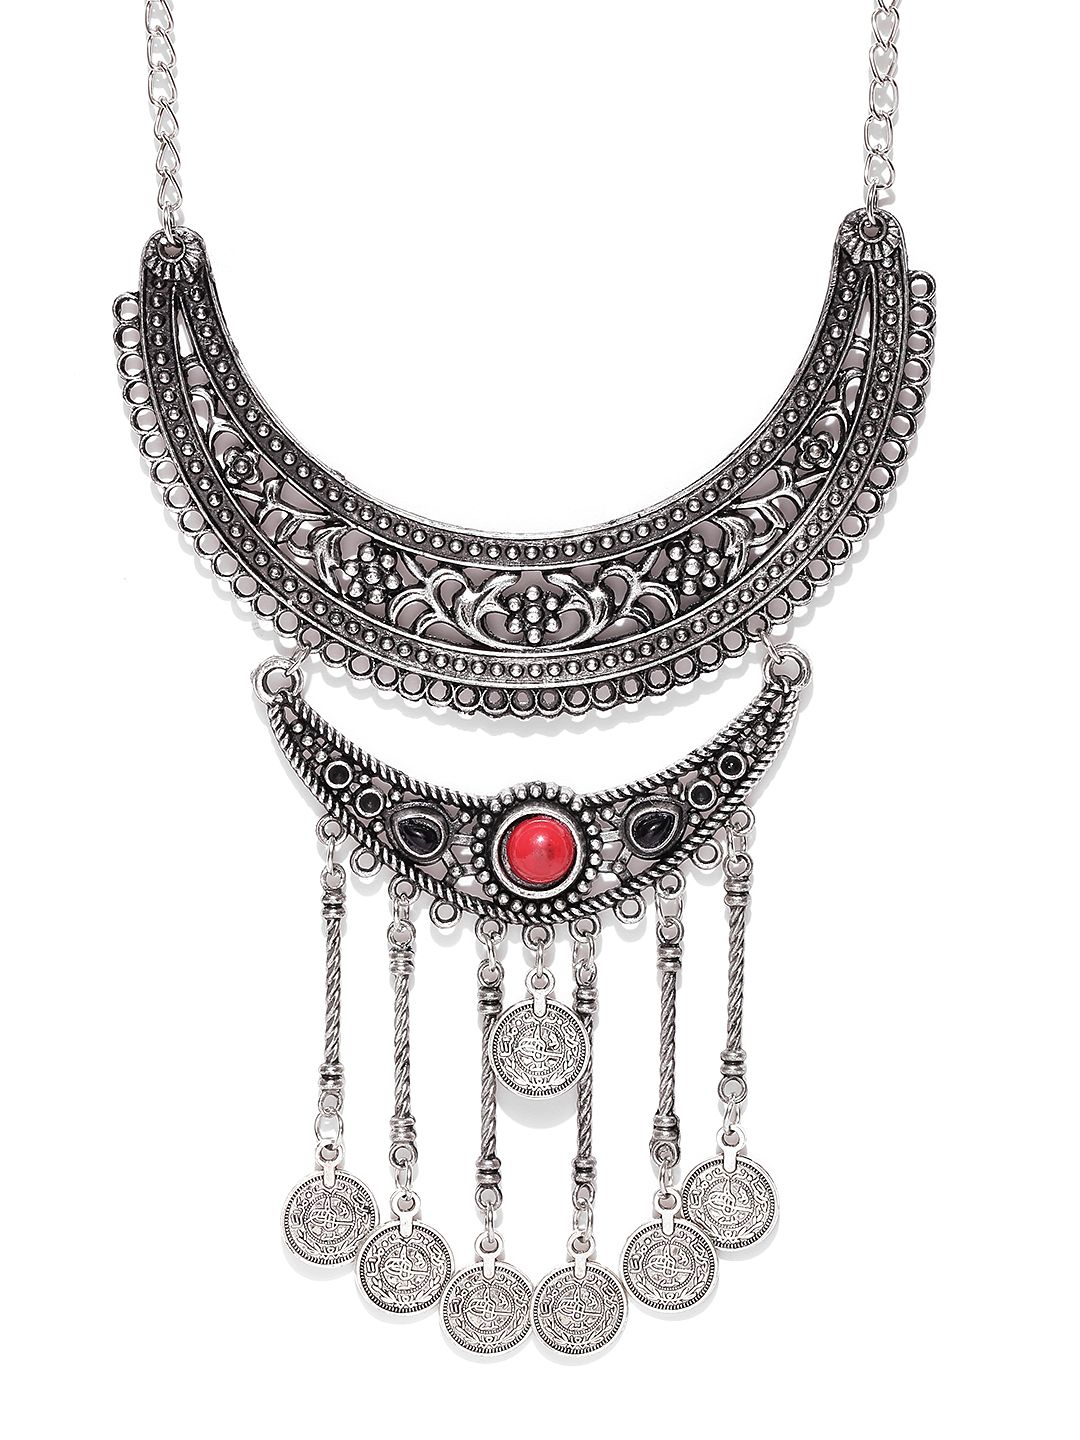 YouBella Oxidised Silver-Plated Cut-Out Textured Necklace Price in India